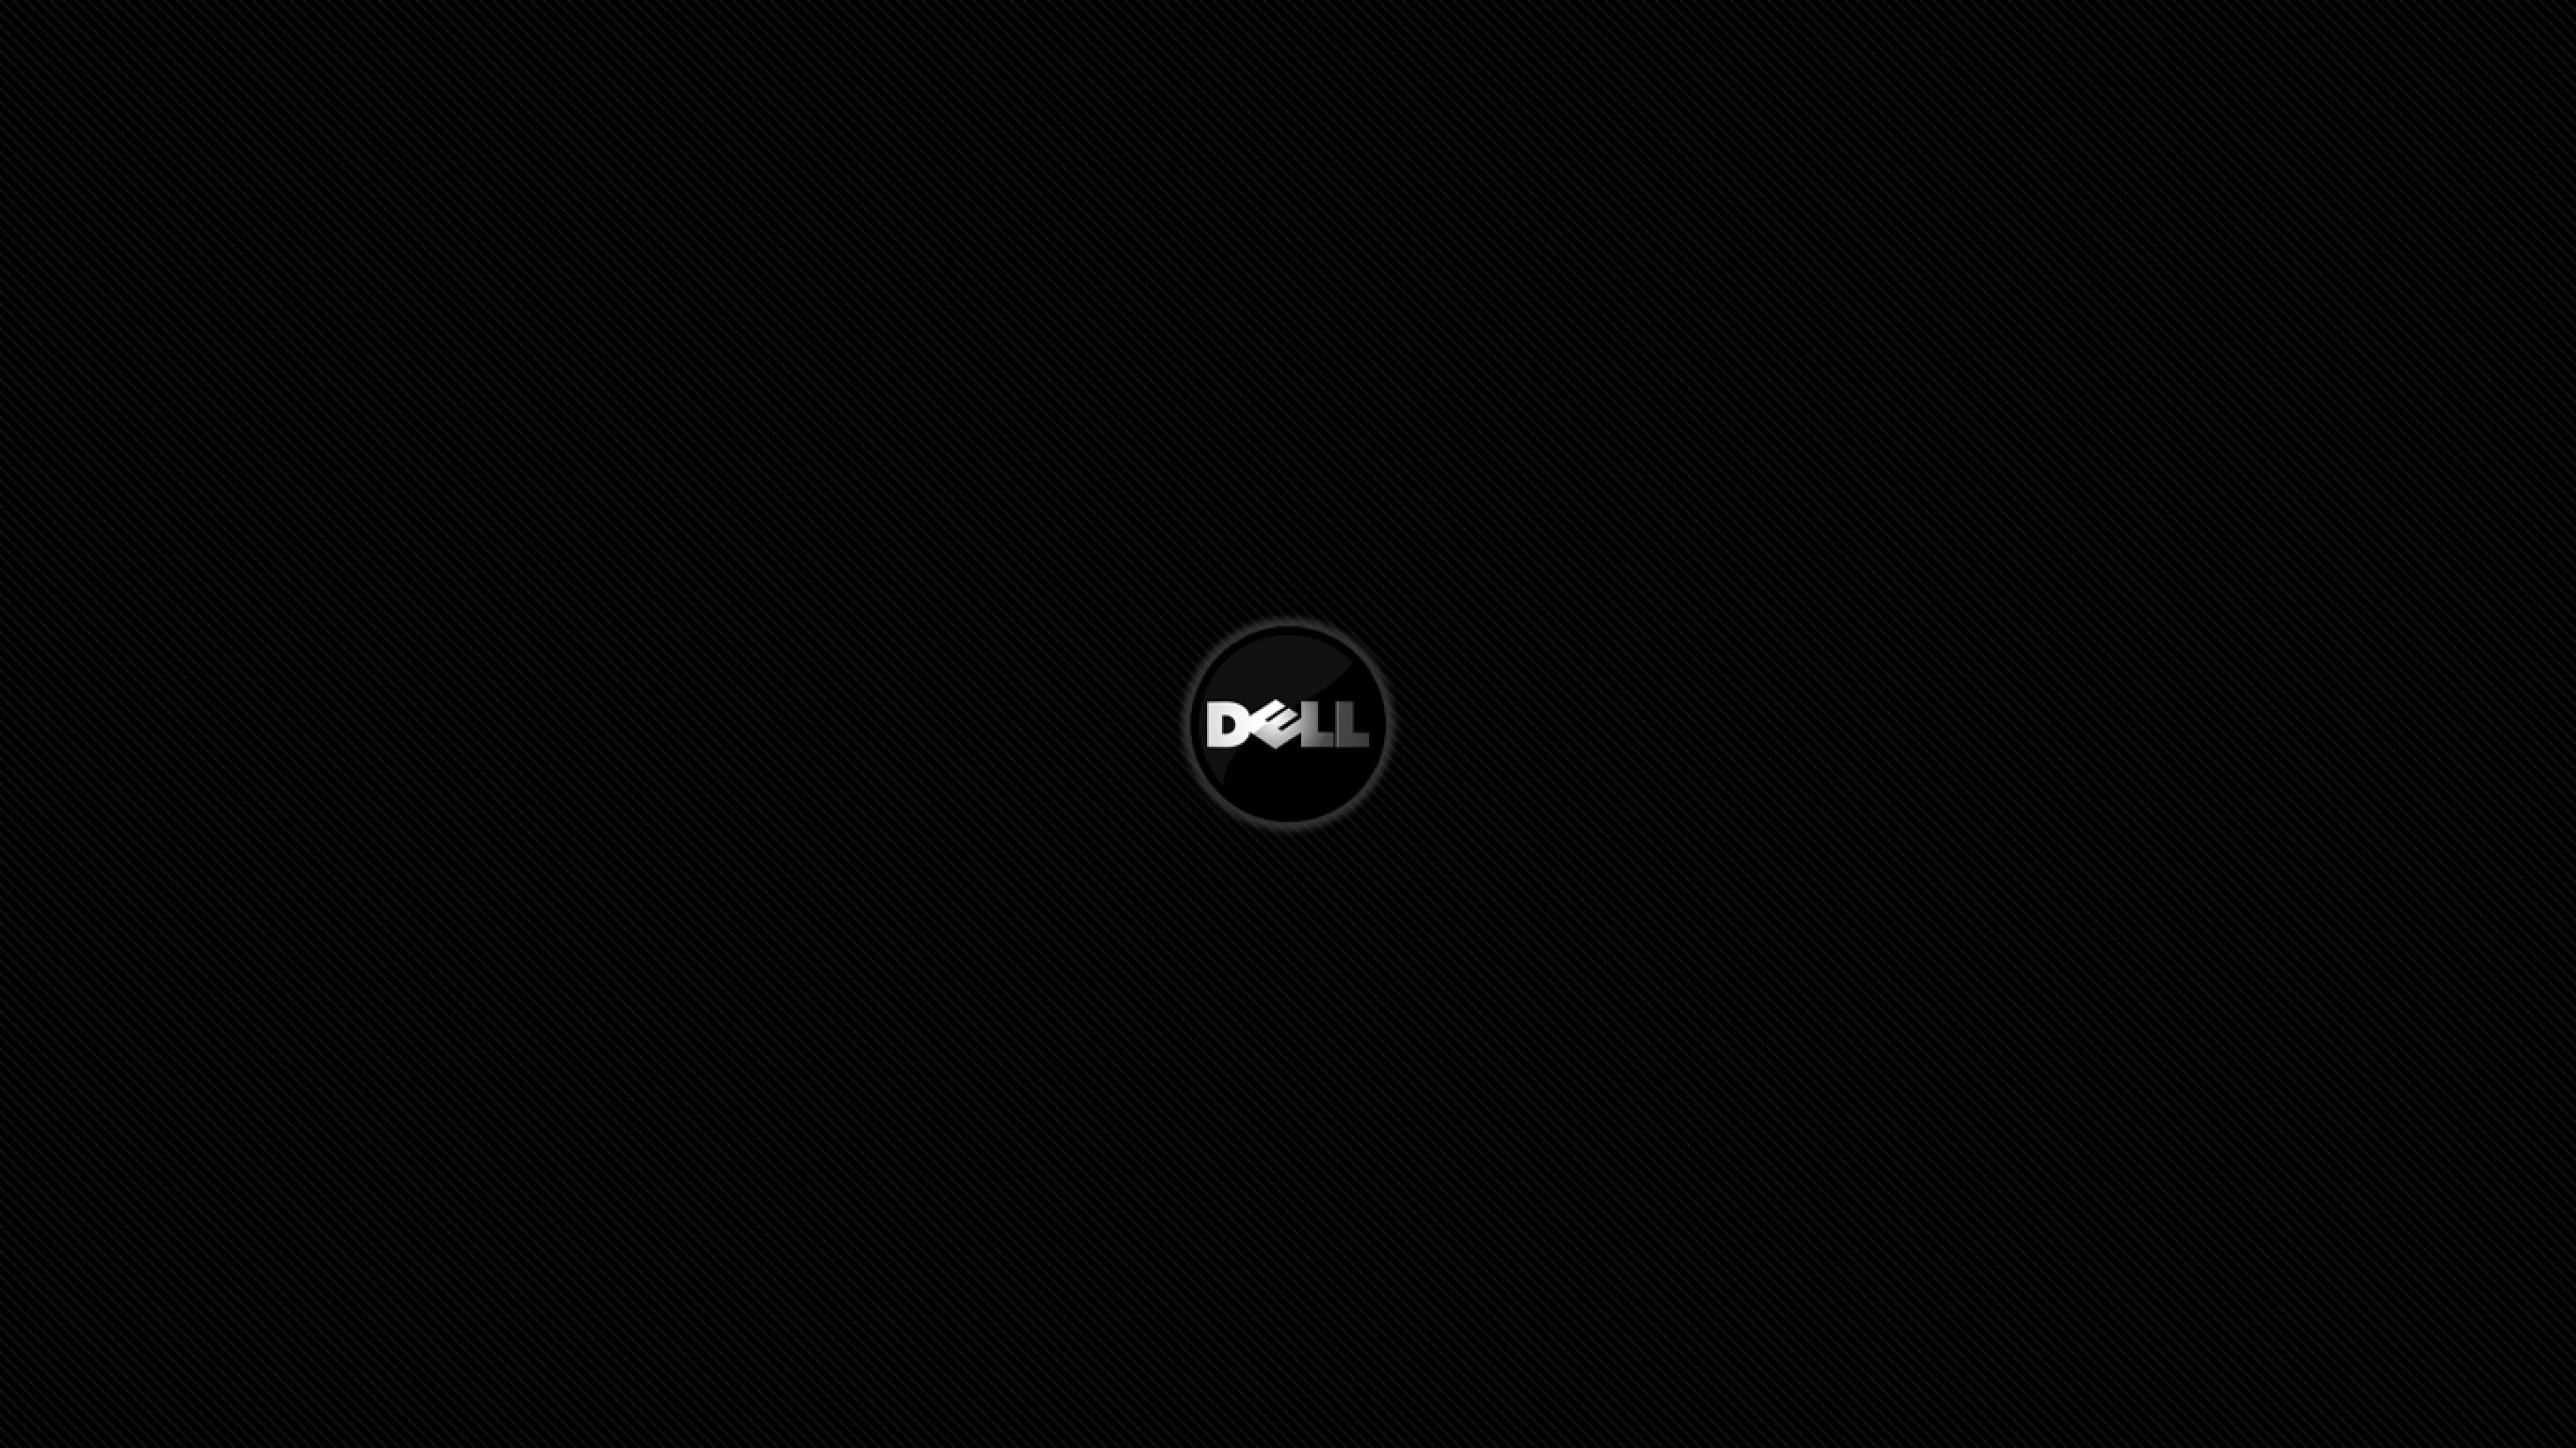 3750x2108 Dell Backgrounds Free Download.